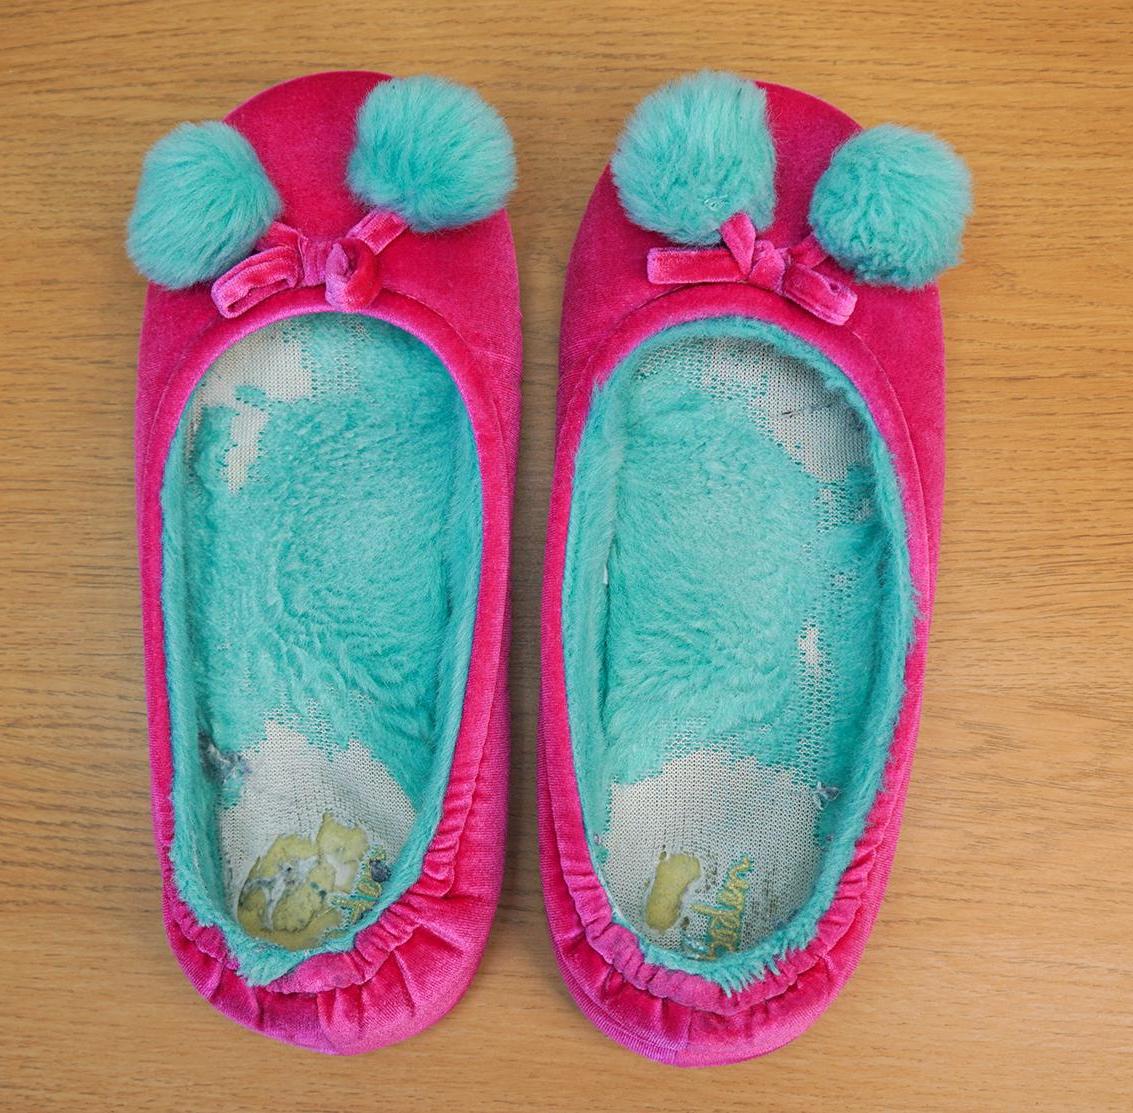 How to Fix Slippers That Are Worn on the Inside | Replace the Insole